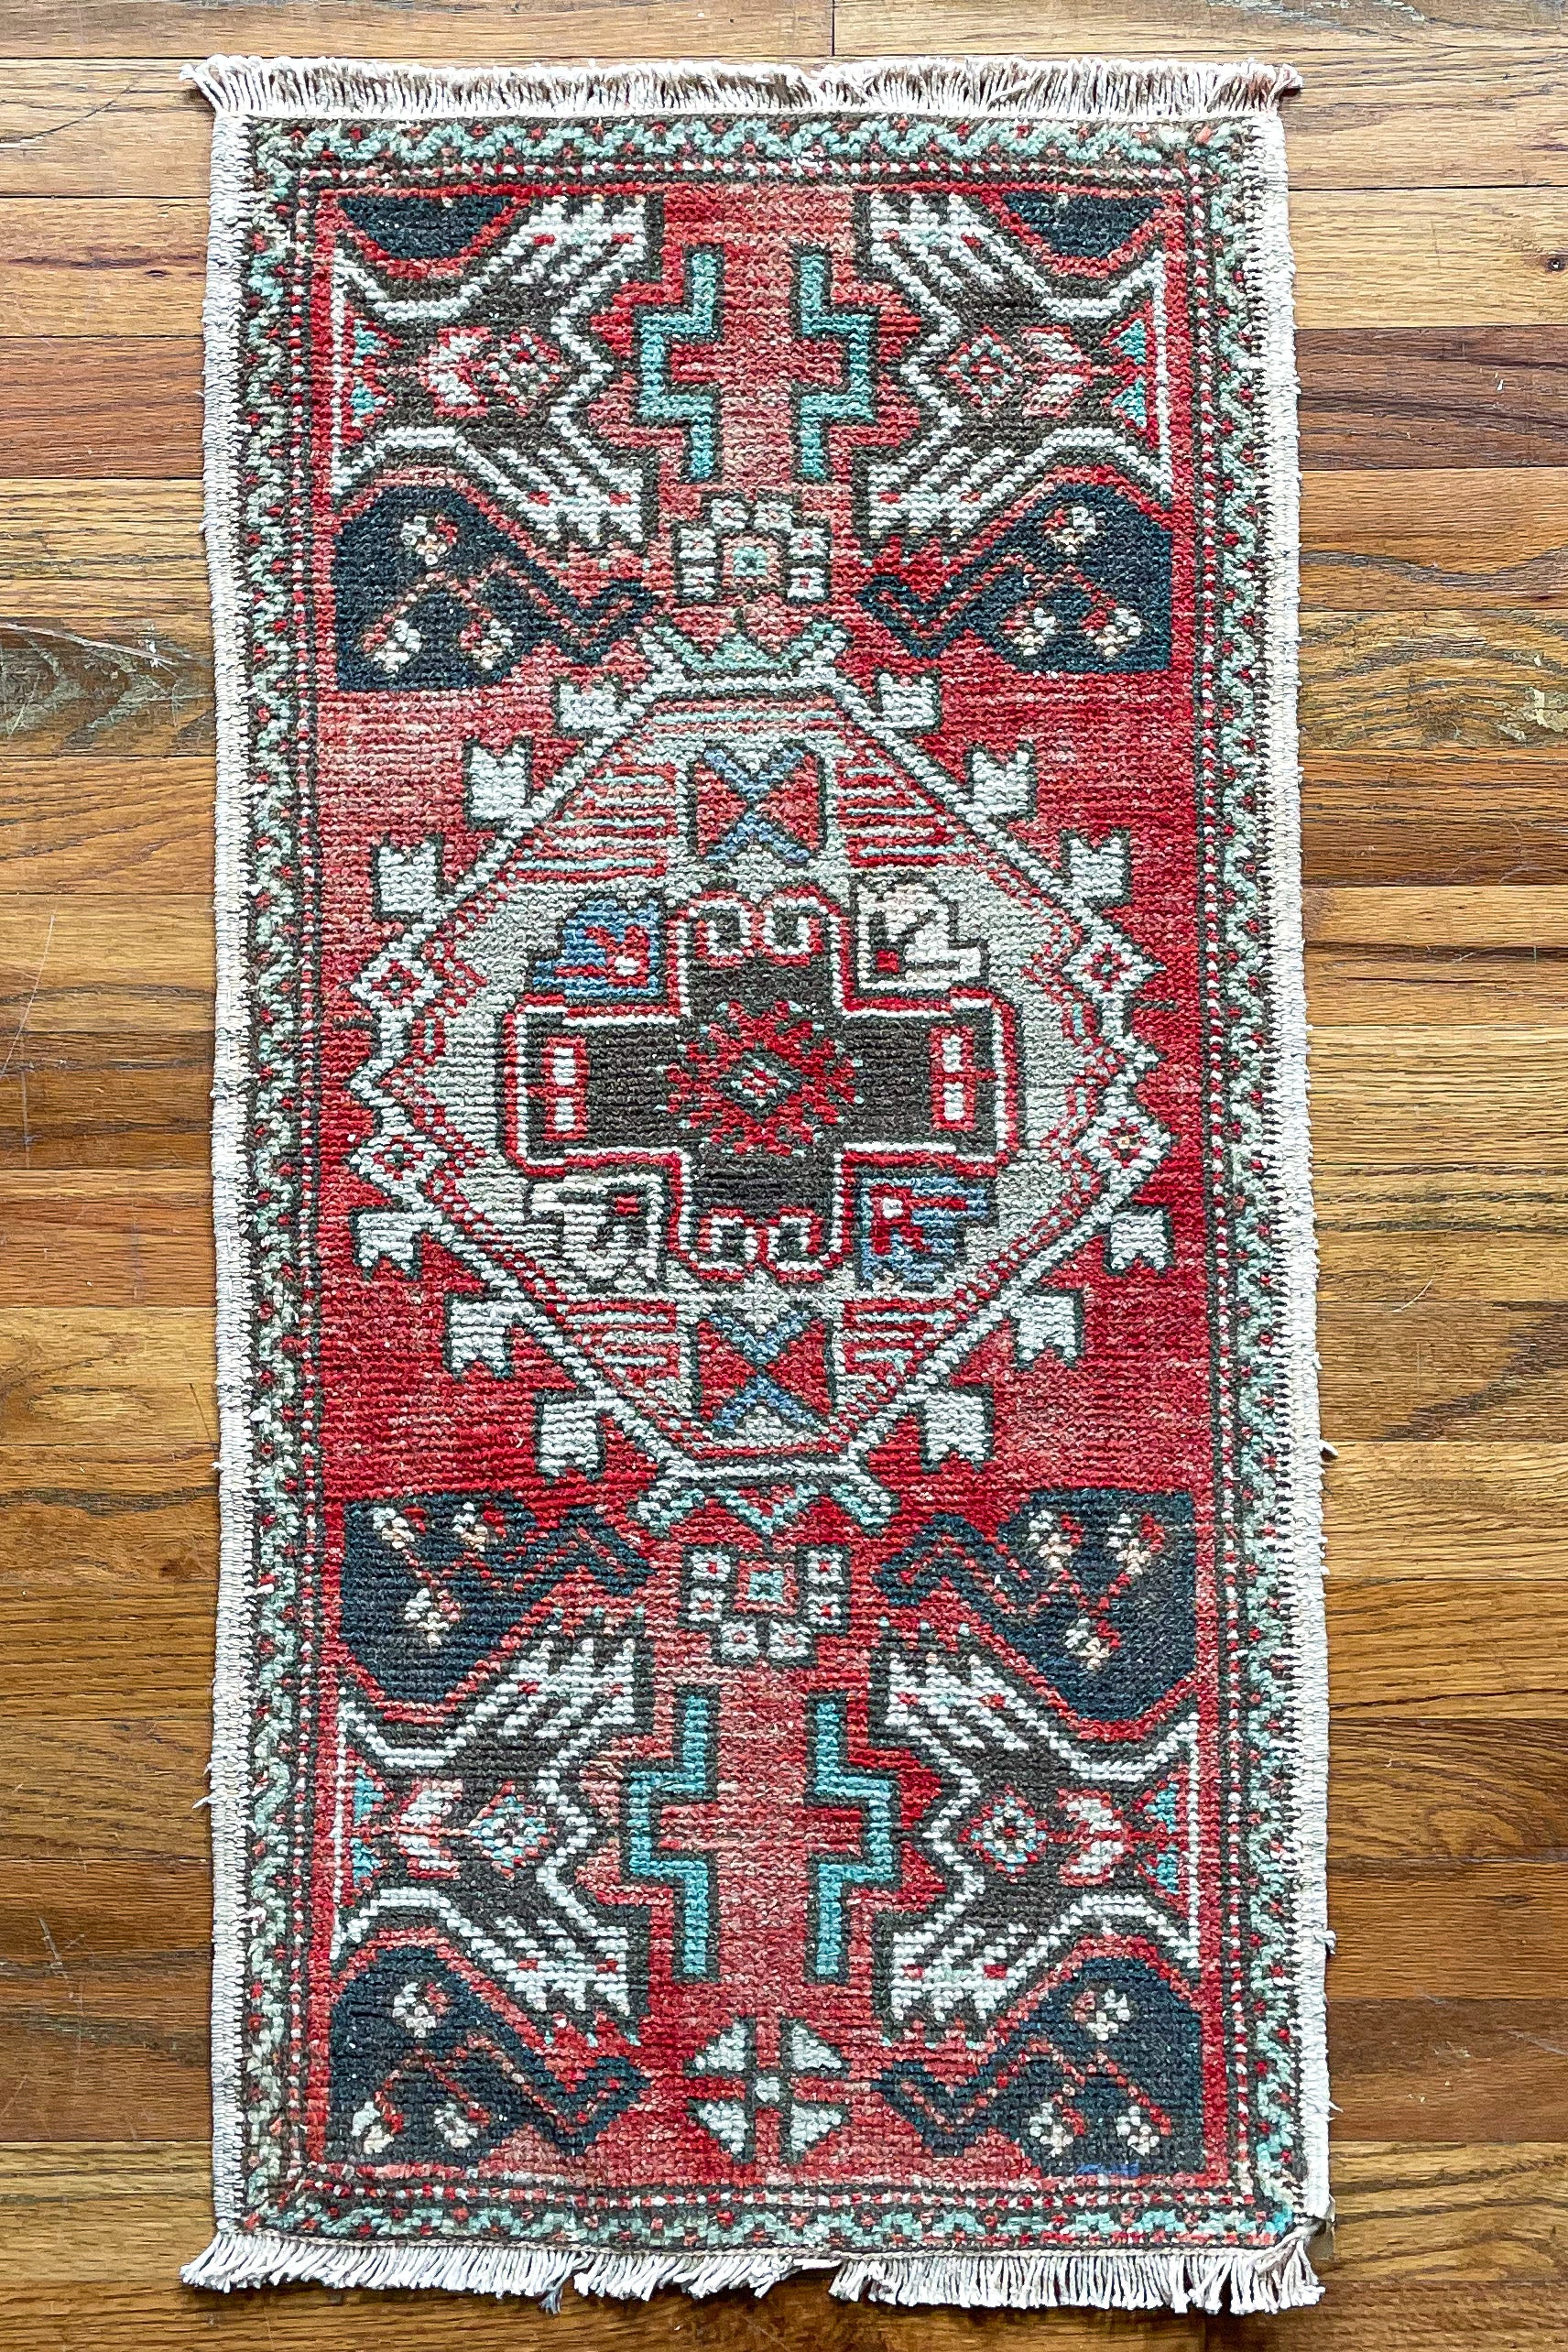 Woven vintage Turkish mini rug in red, brown, and cream.